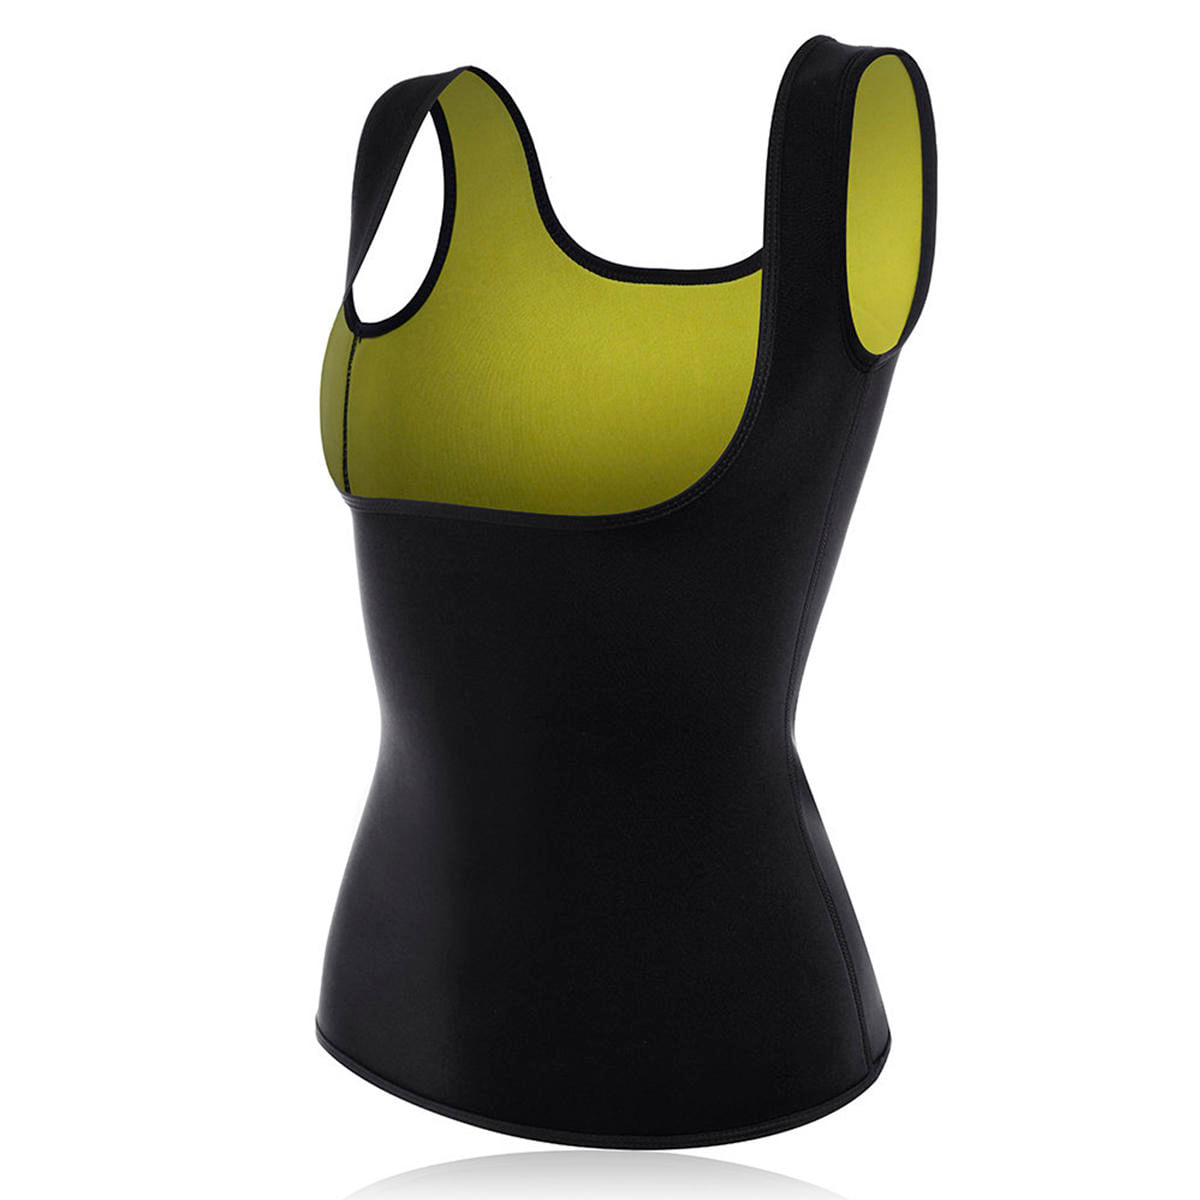 Chaleco Tubular Thermo Shapers - REDUCE MEDIDAS MUY FACILMENTE Sport Fitness - M